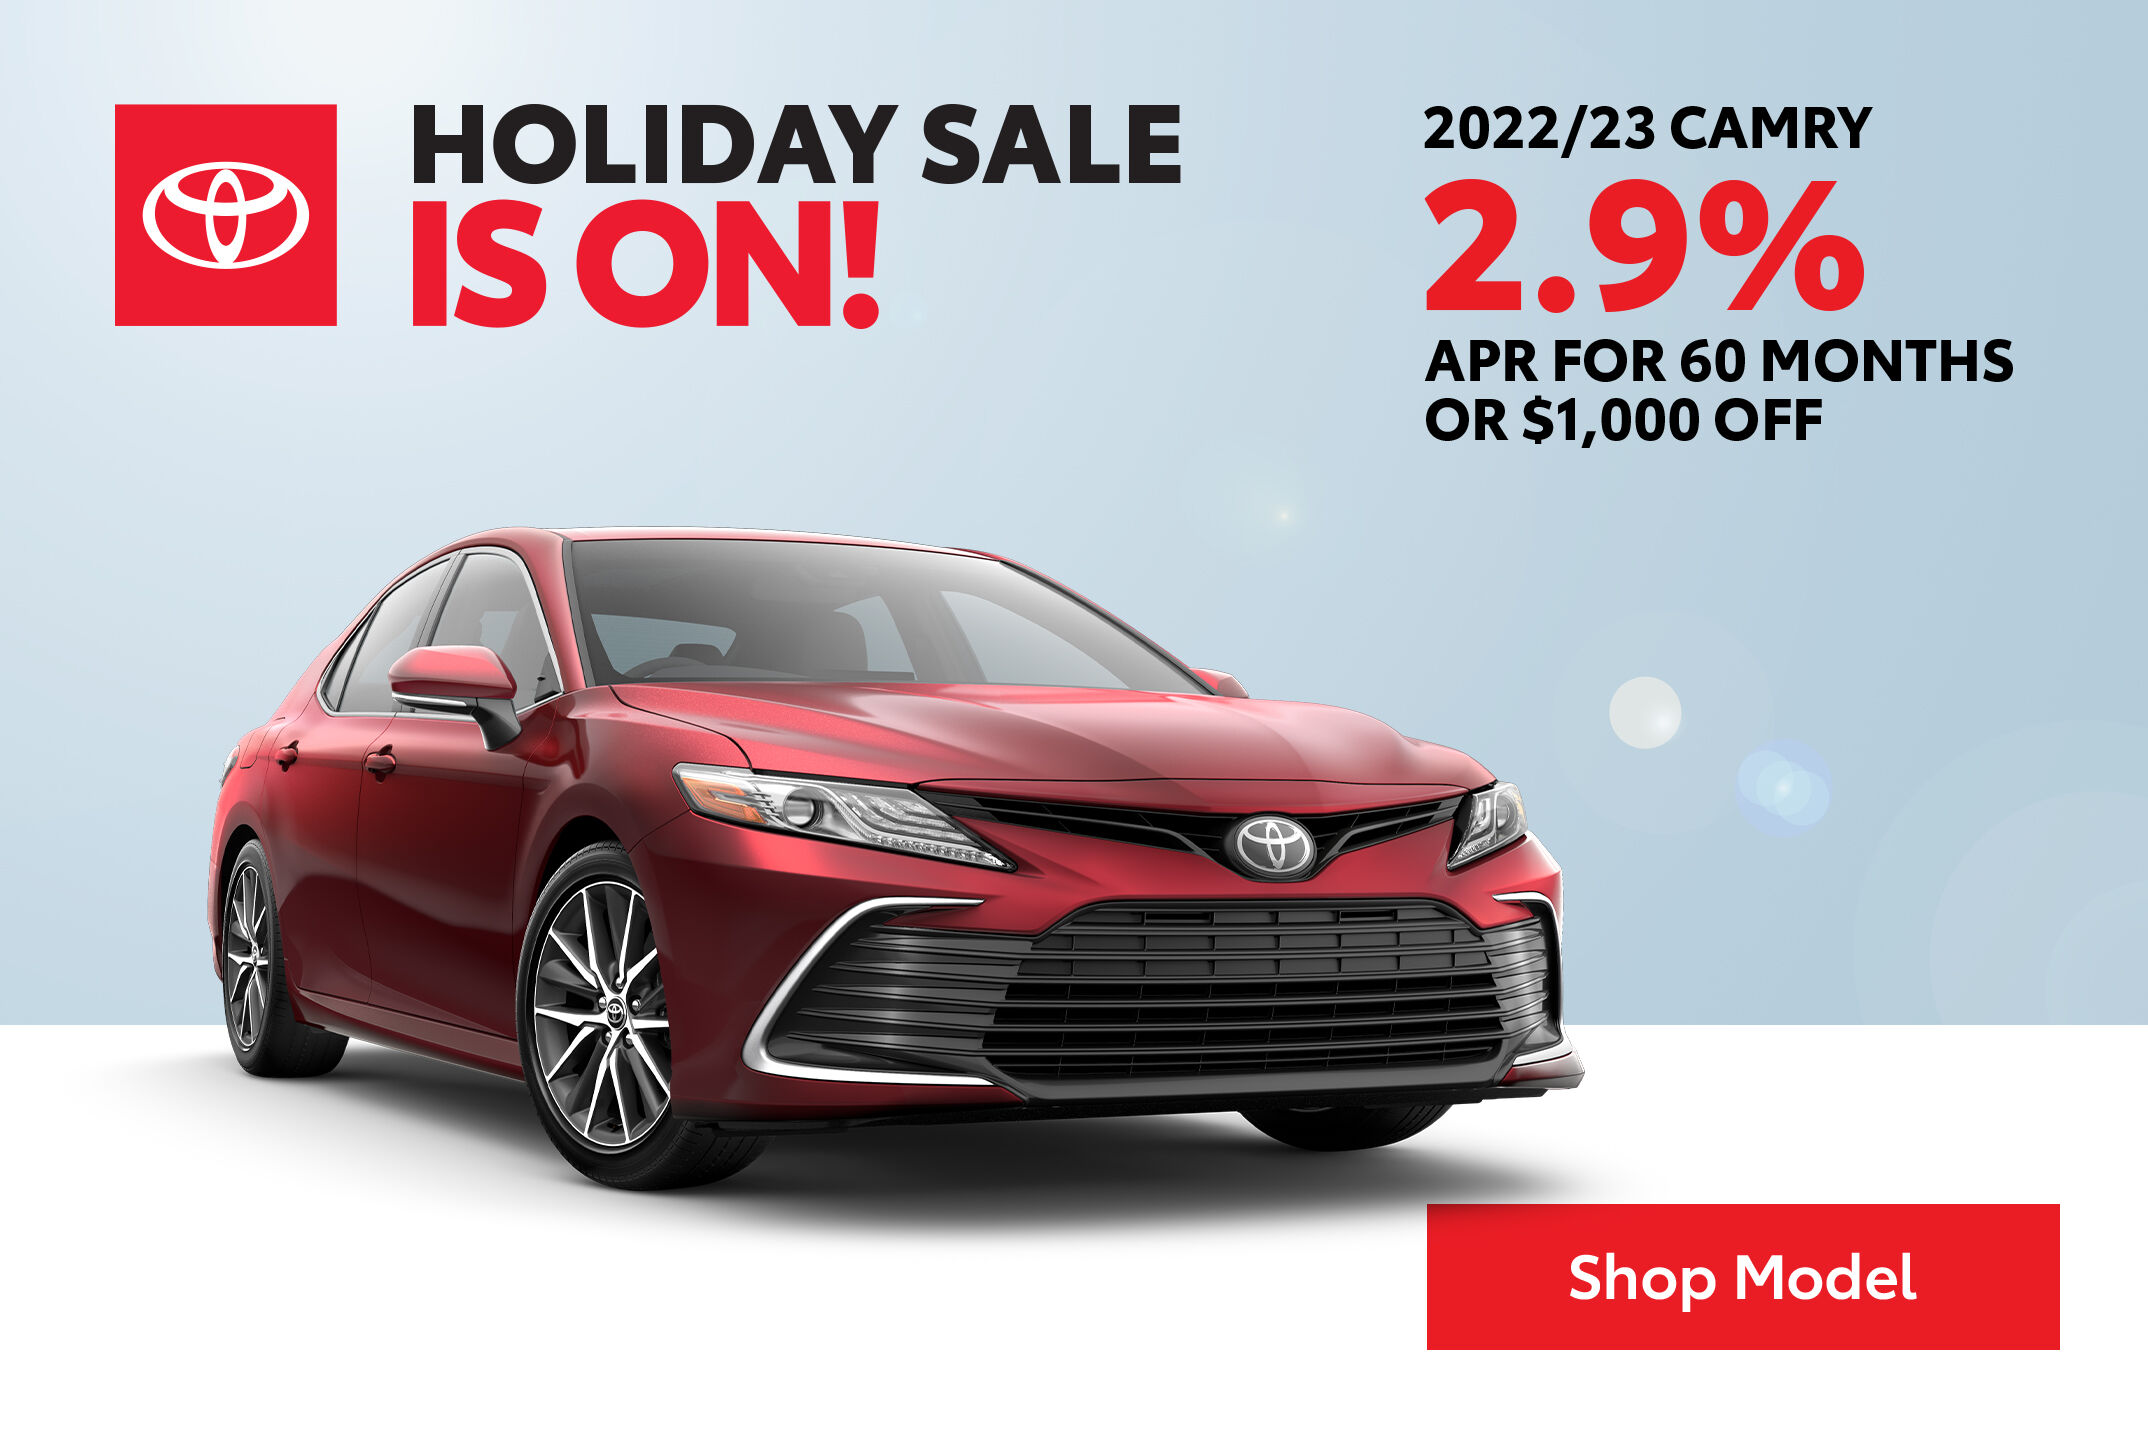 Holiday Sale - 2022 & 2023 Camry - 2.9% APR for 60 months or $1,000 off